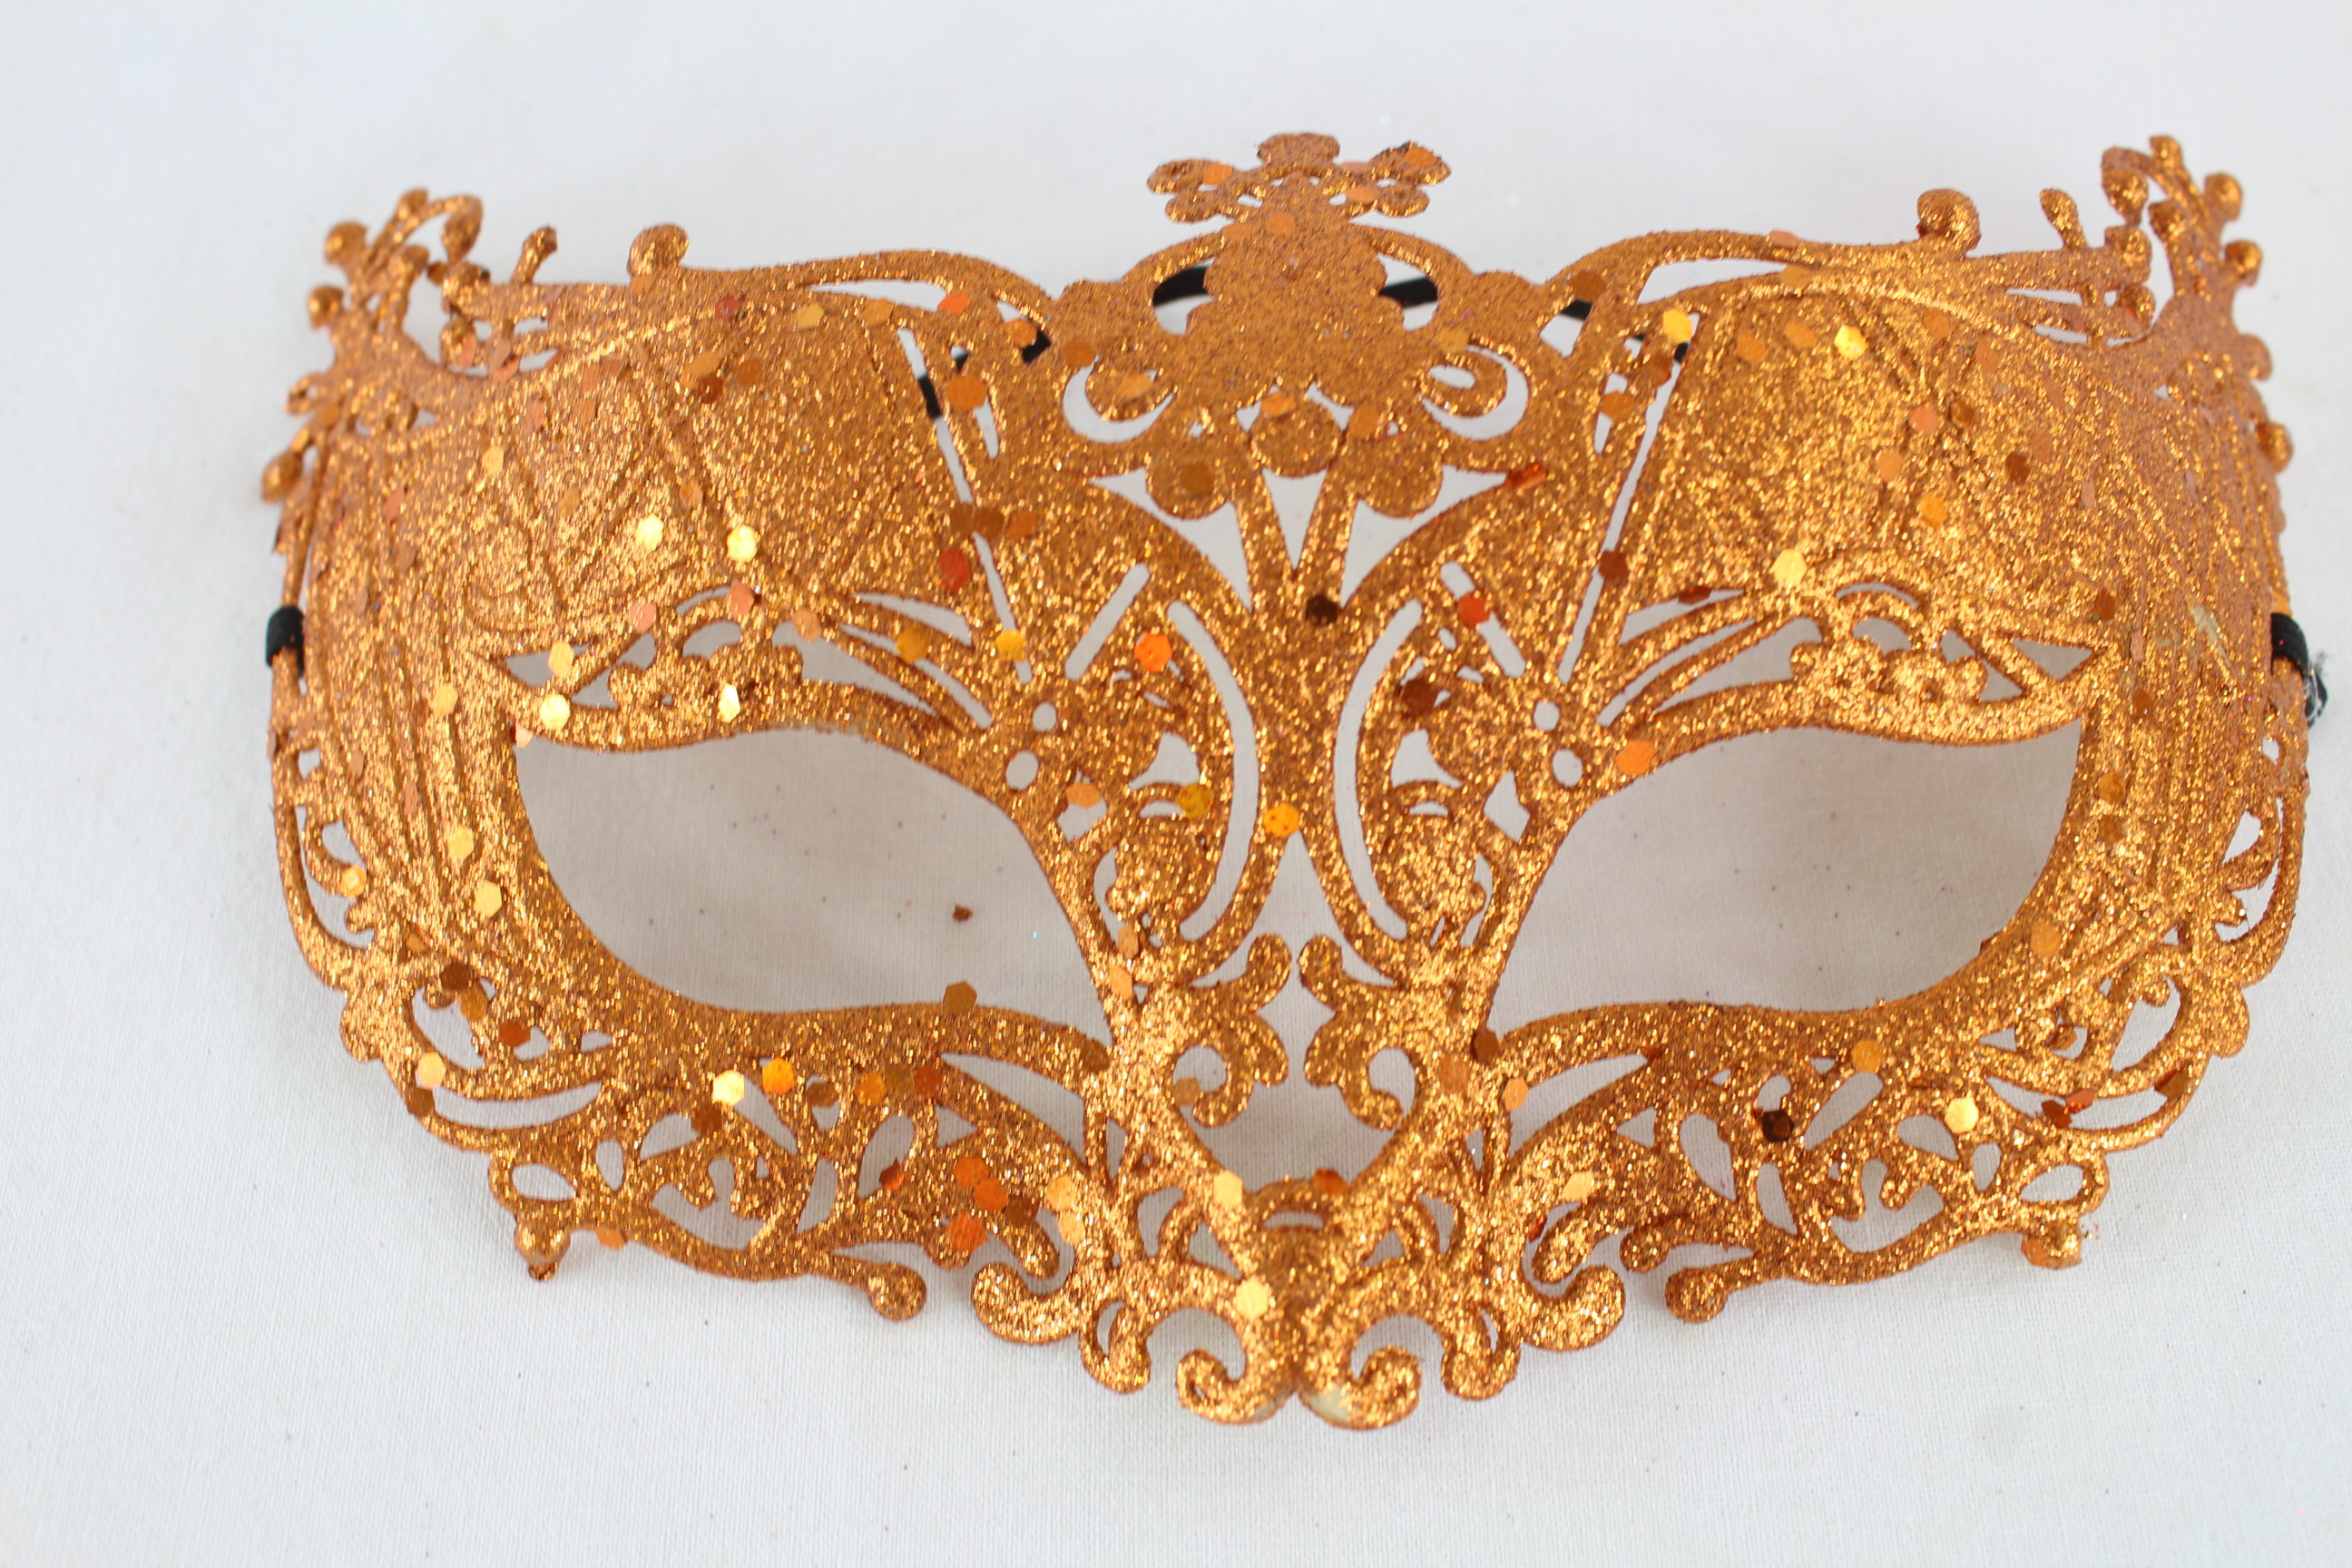 3 x Masquerade Ball Masks - BUY 3 FOR THE PRICE OF 2!